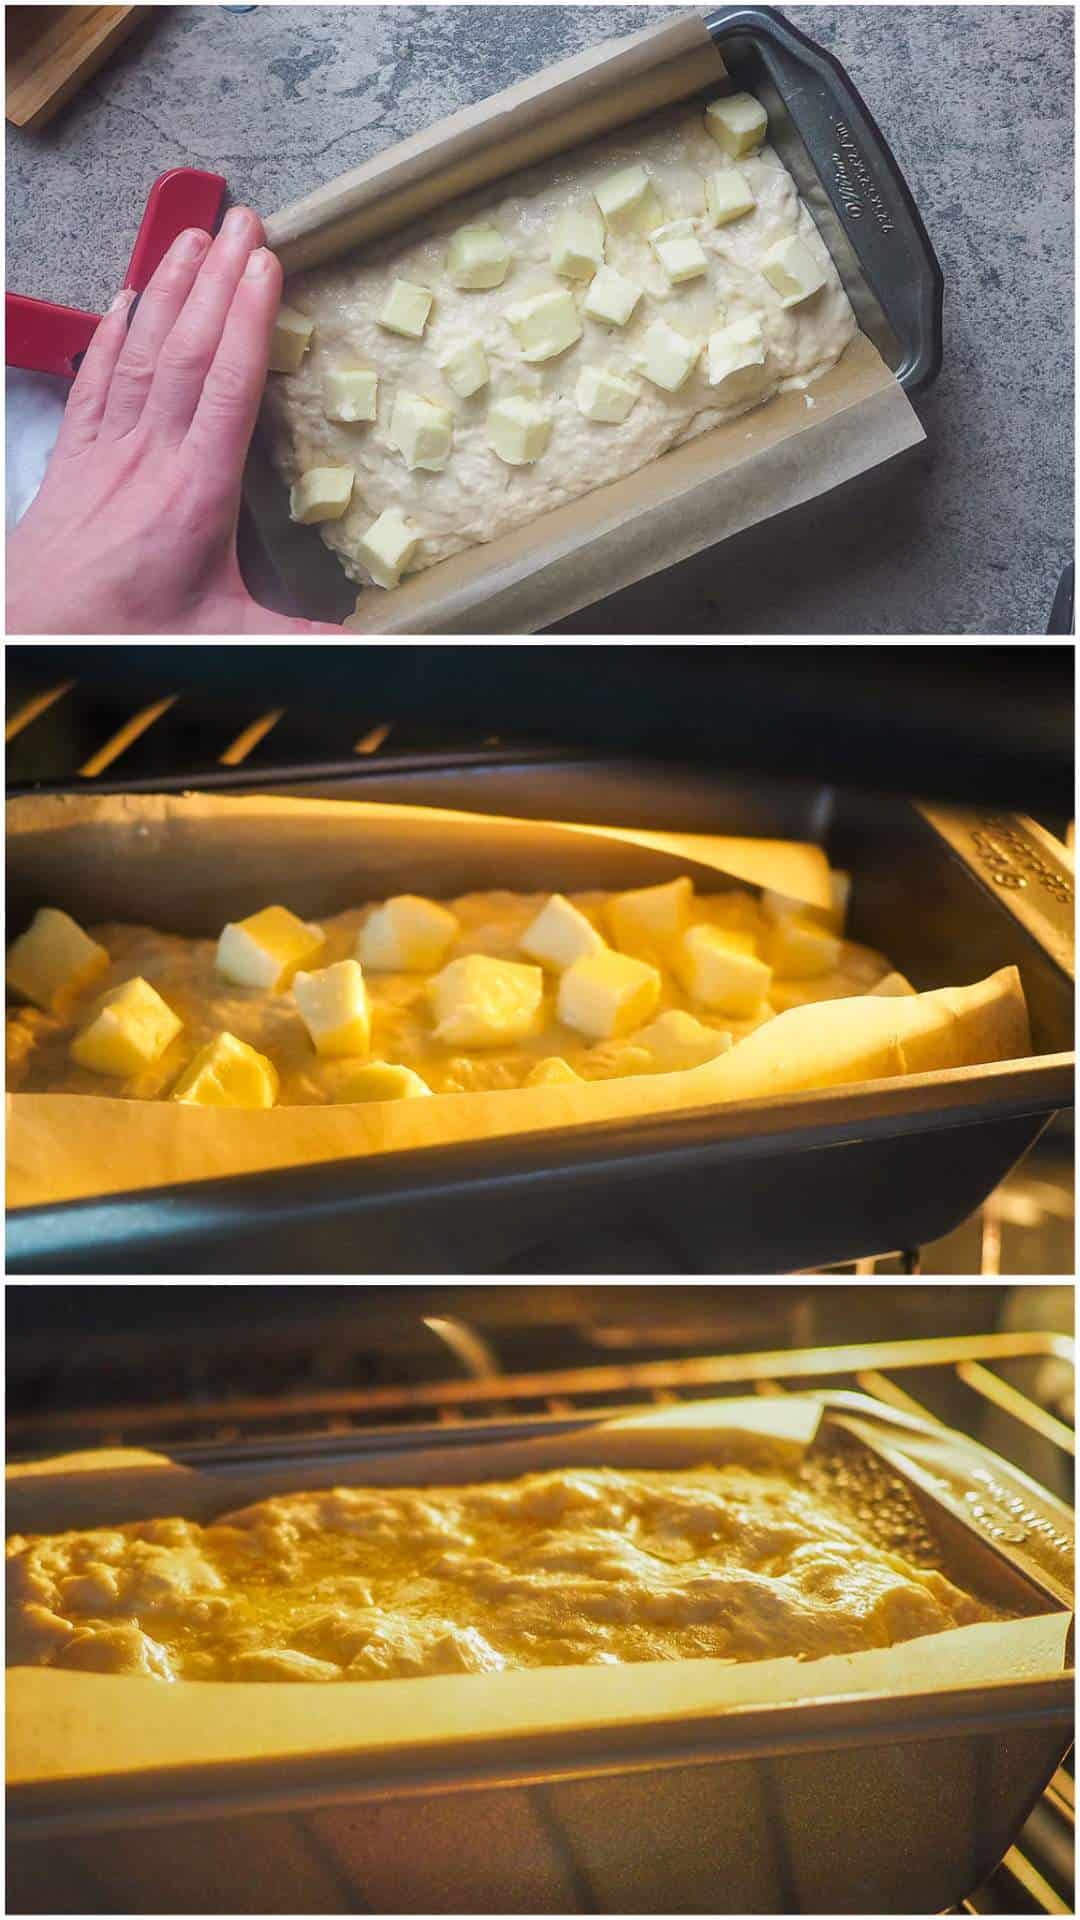 A collage of images showing the process of making beer bread, topped with butter cubes and baking.